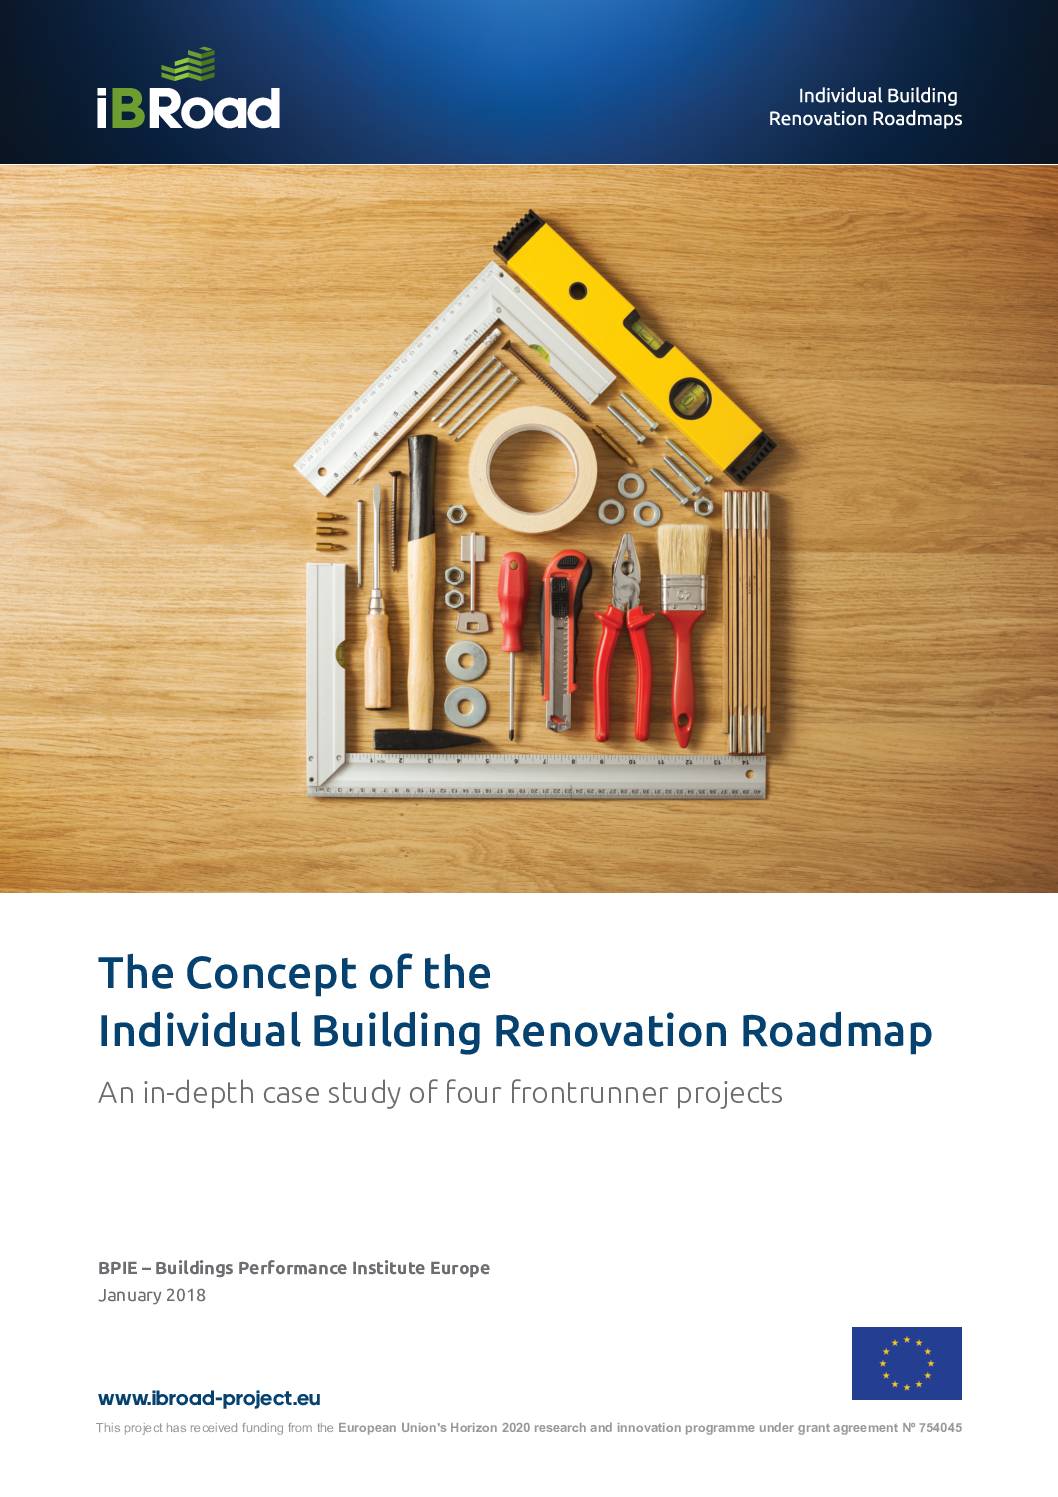 The Concept of the Individual Building Renovation Roadmap